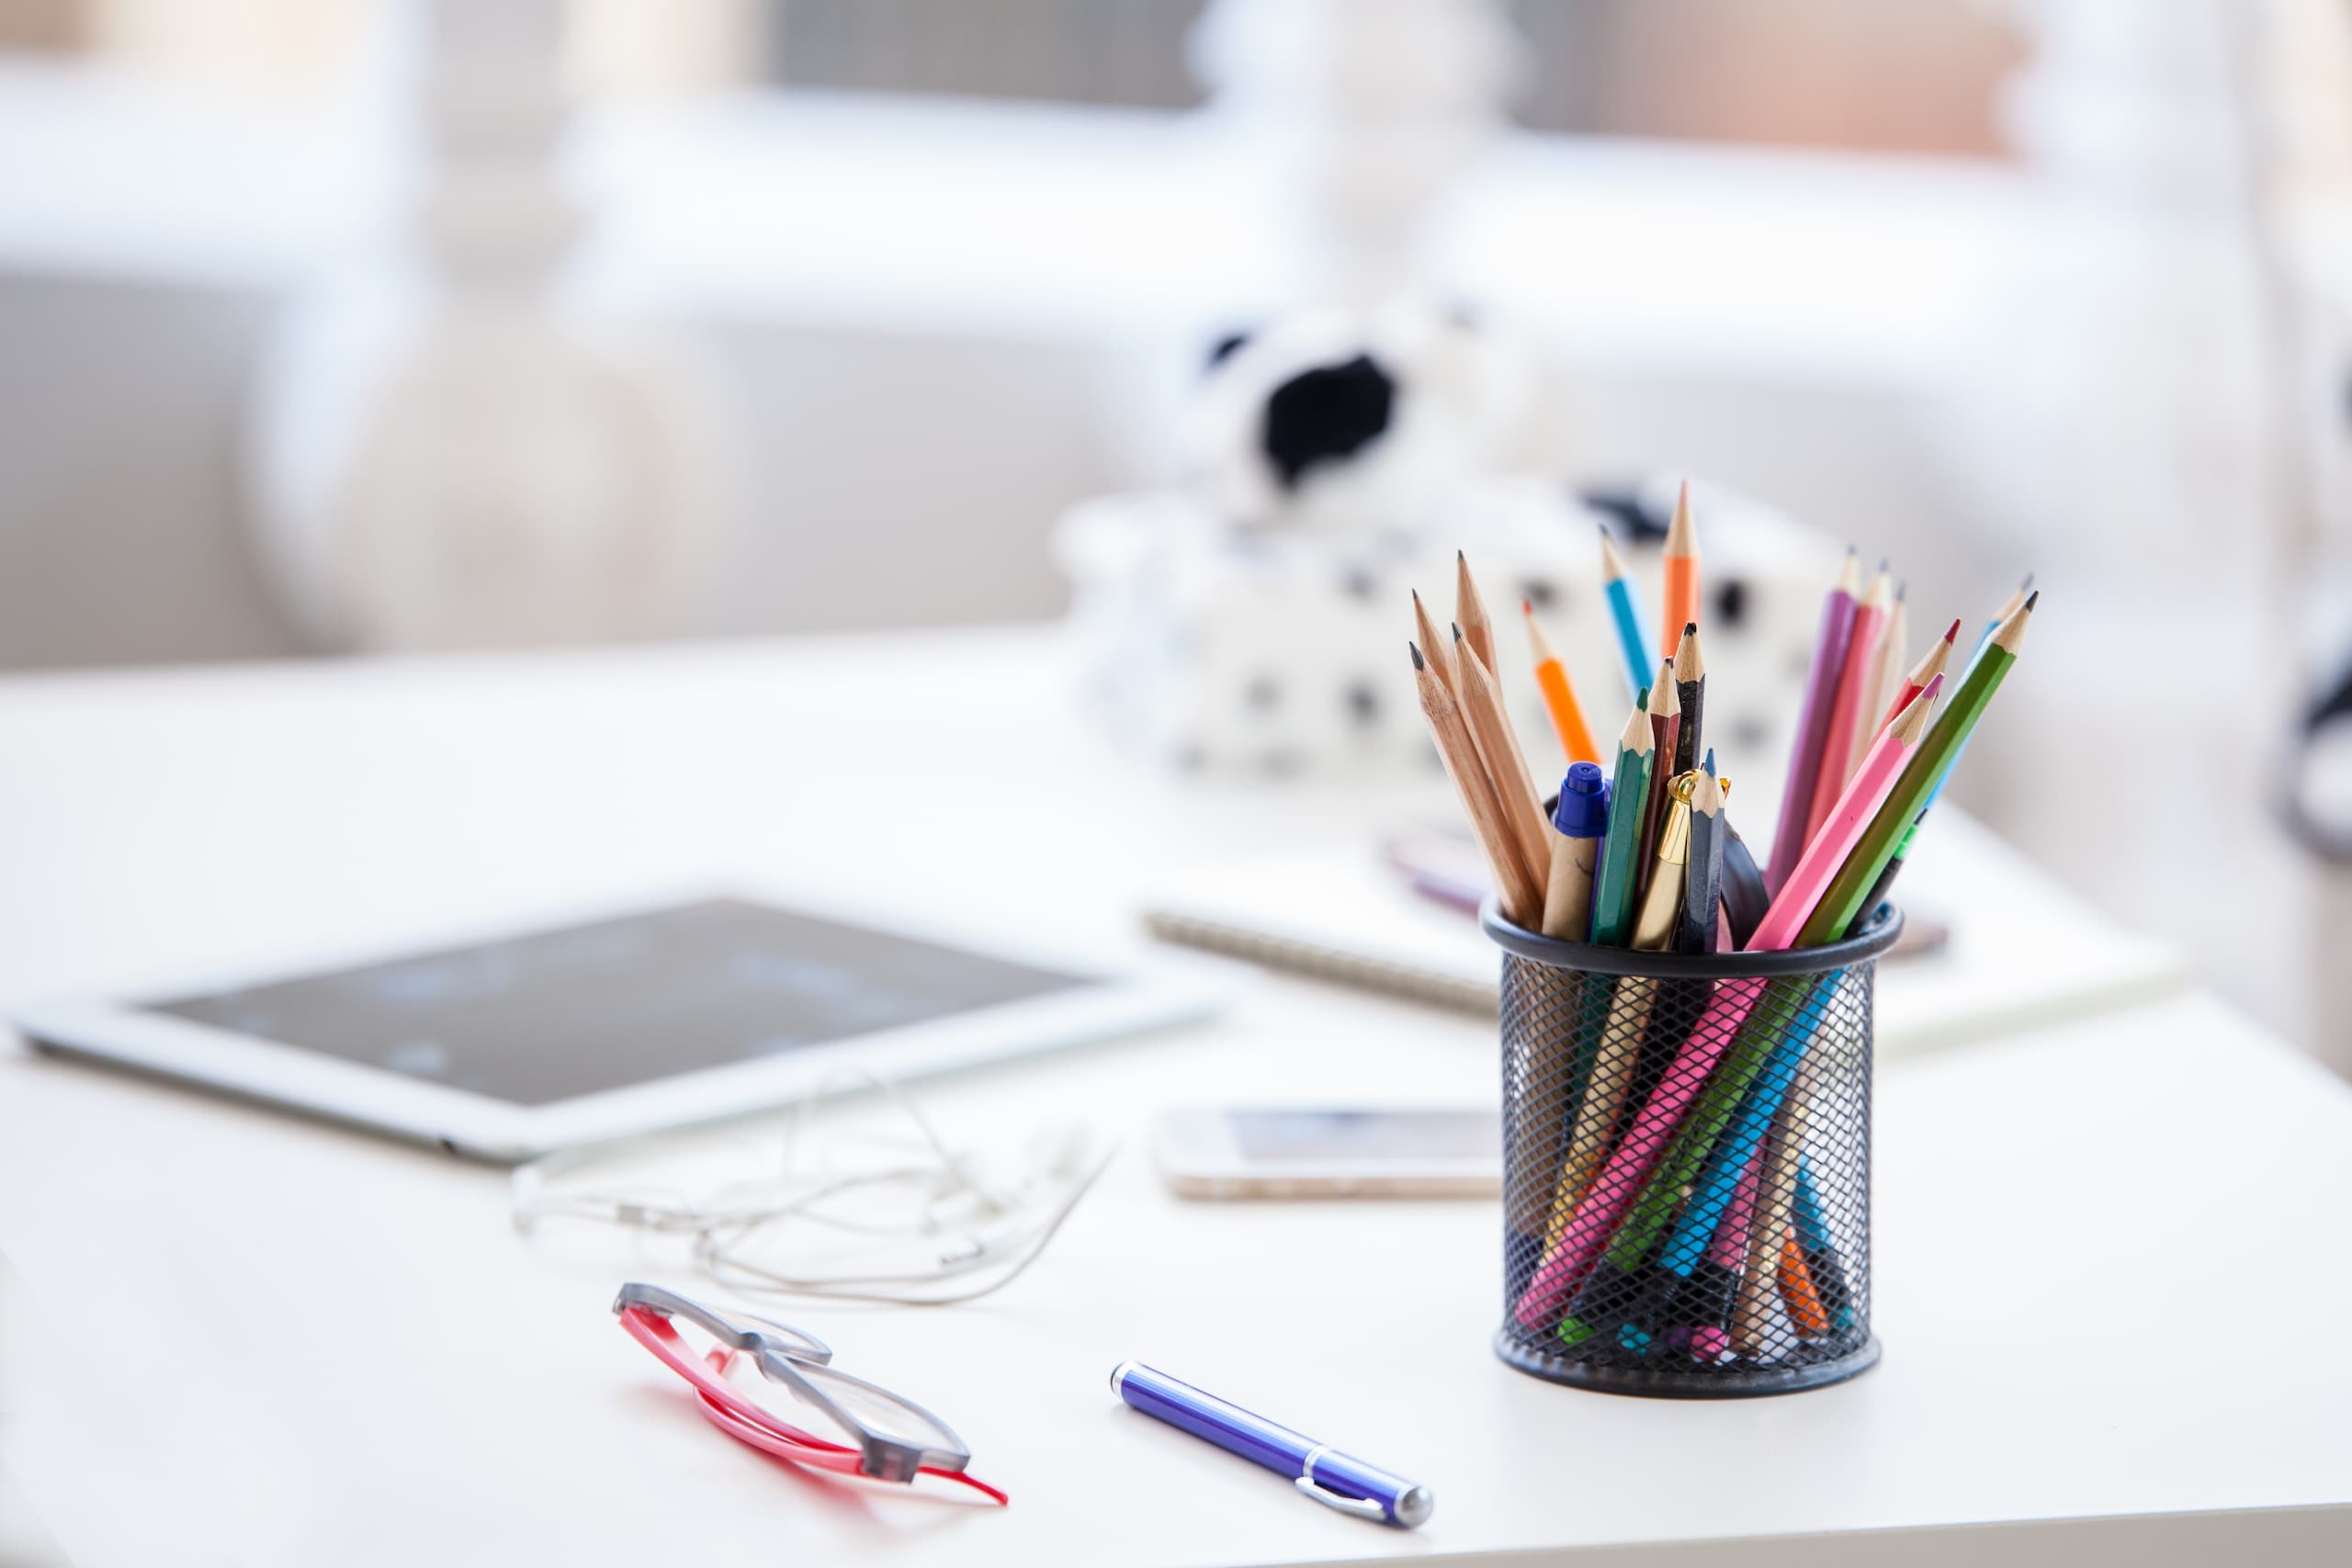 Pencil-holder, iPad and various supplies on a desktop